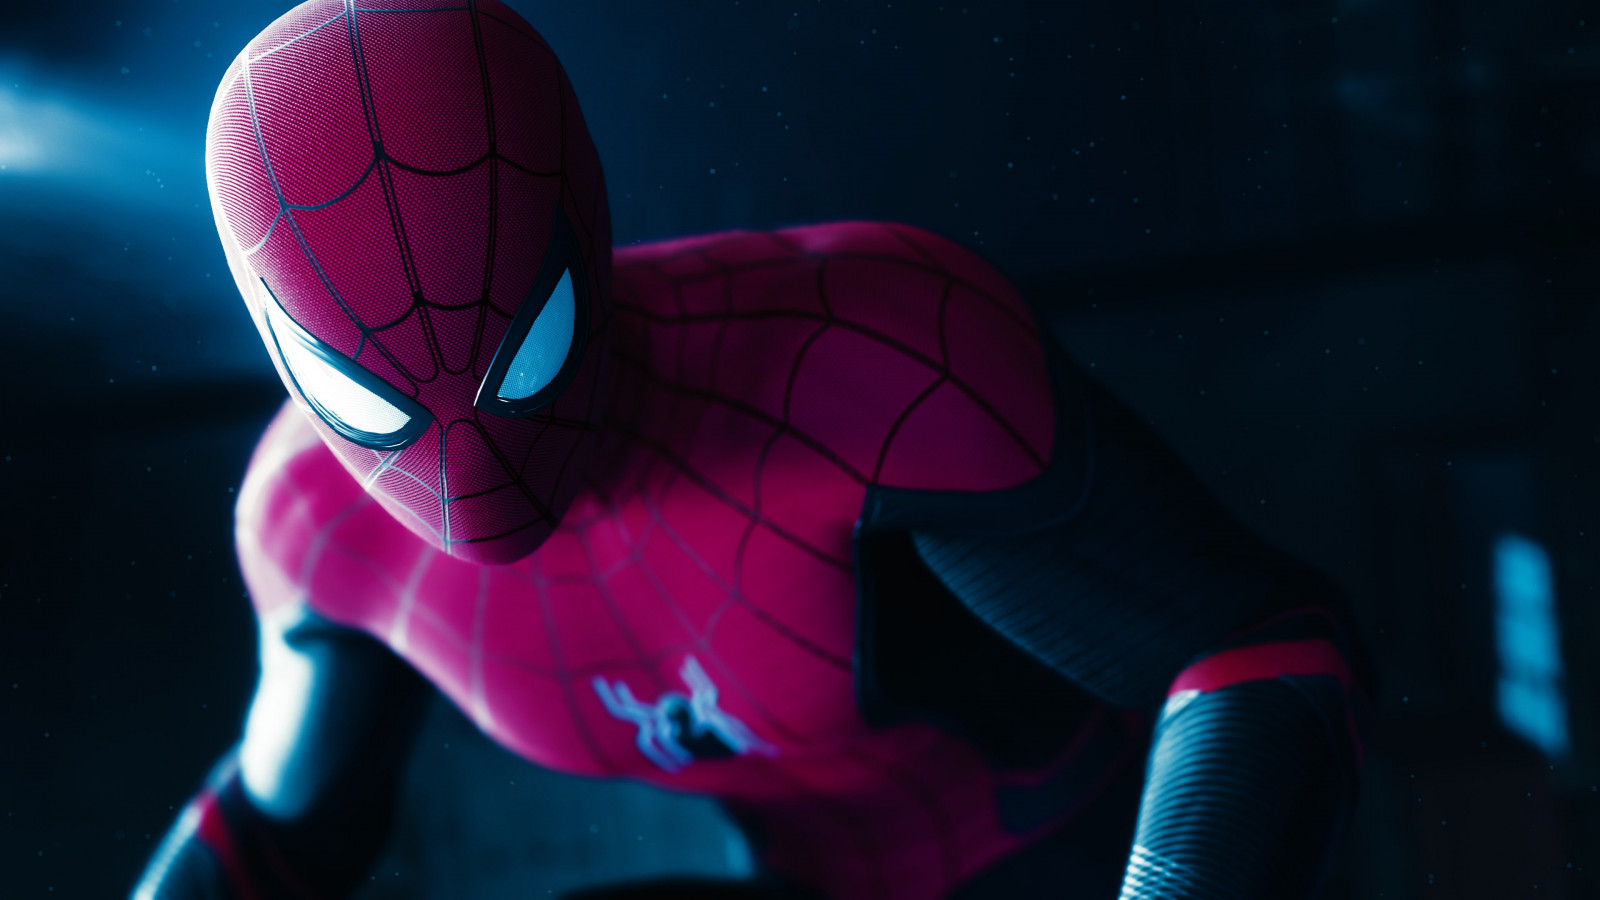 Download wallpaper: The Game: Spider man far from home 1600x900